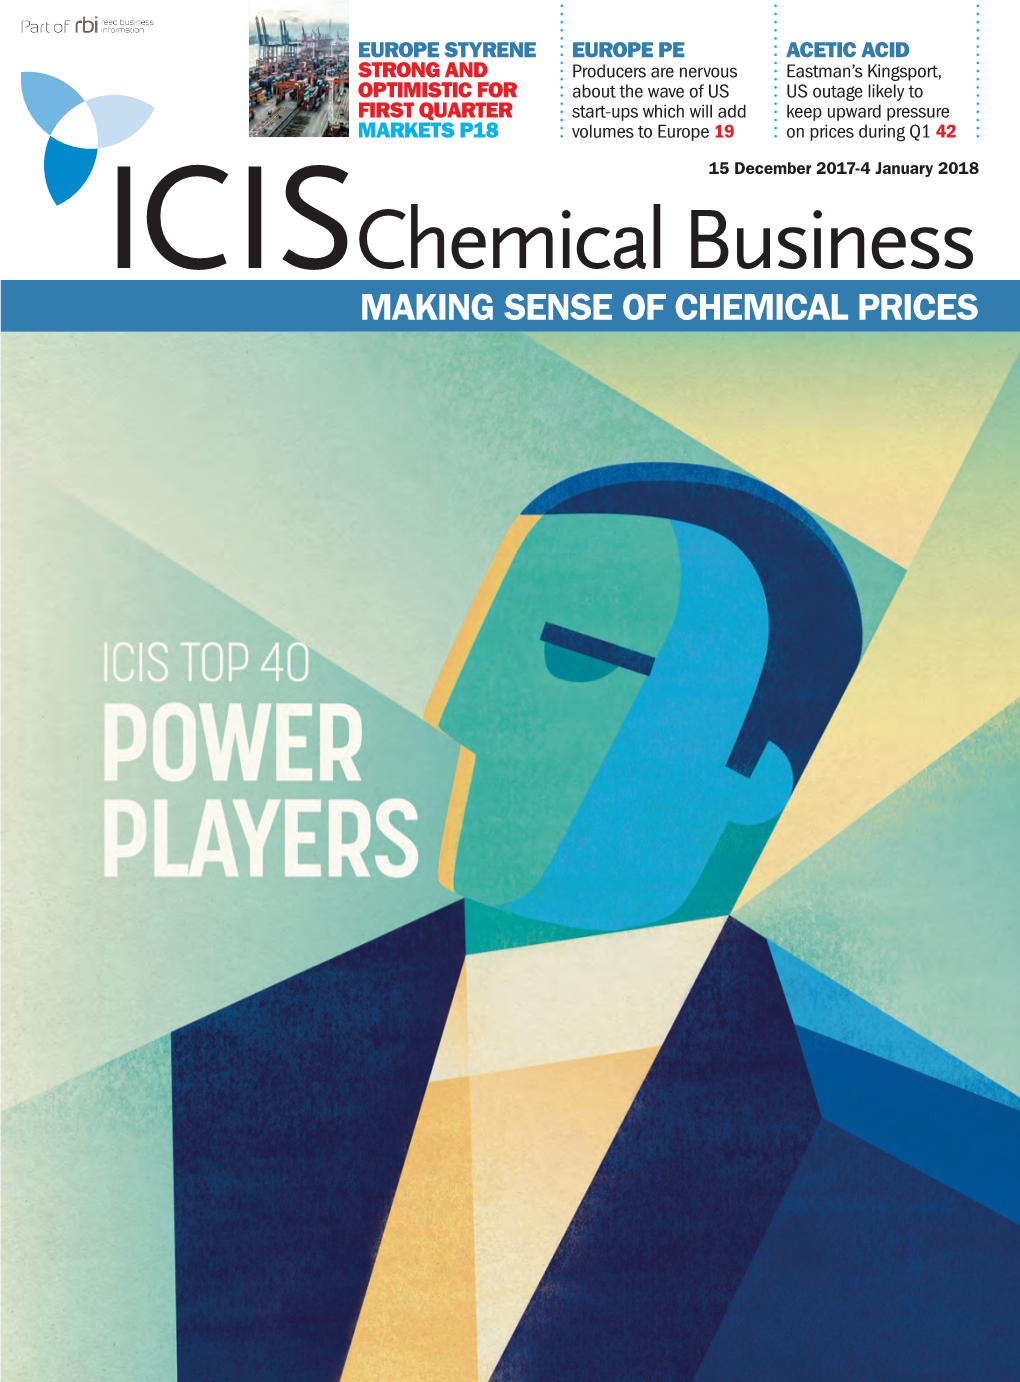 Making Sense of Chemical Prices Special Report ICIS TOP 40 POWER PLAYERS Phil Arthur